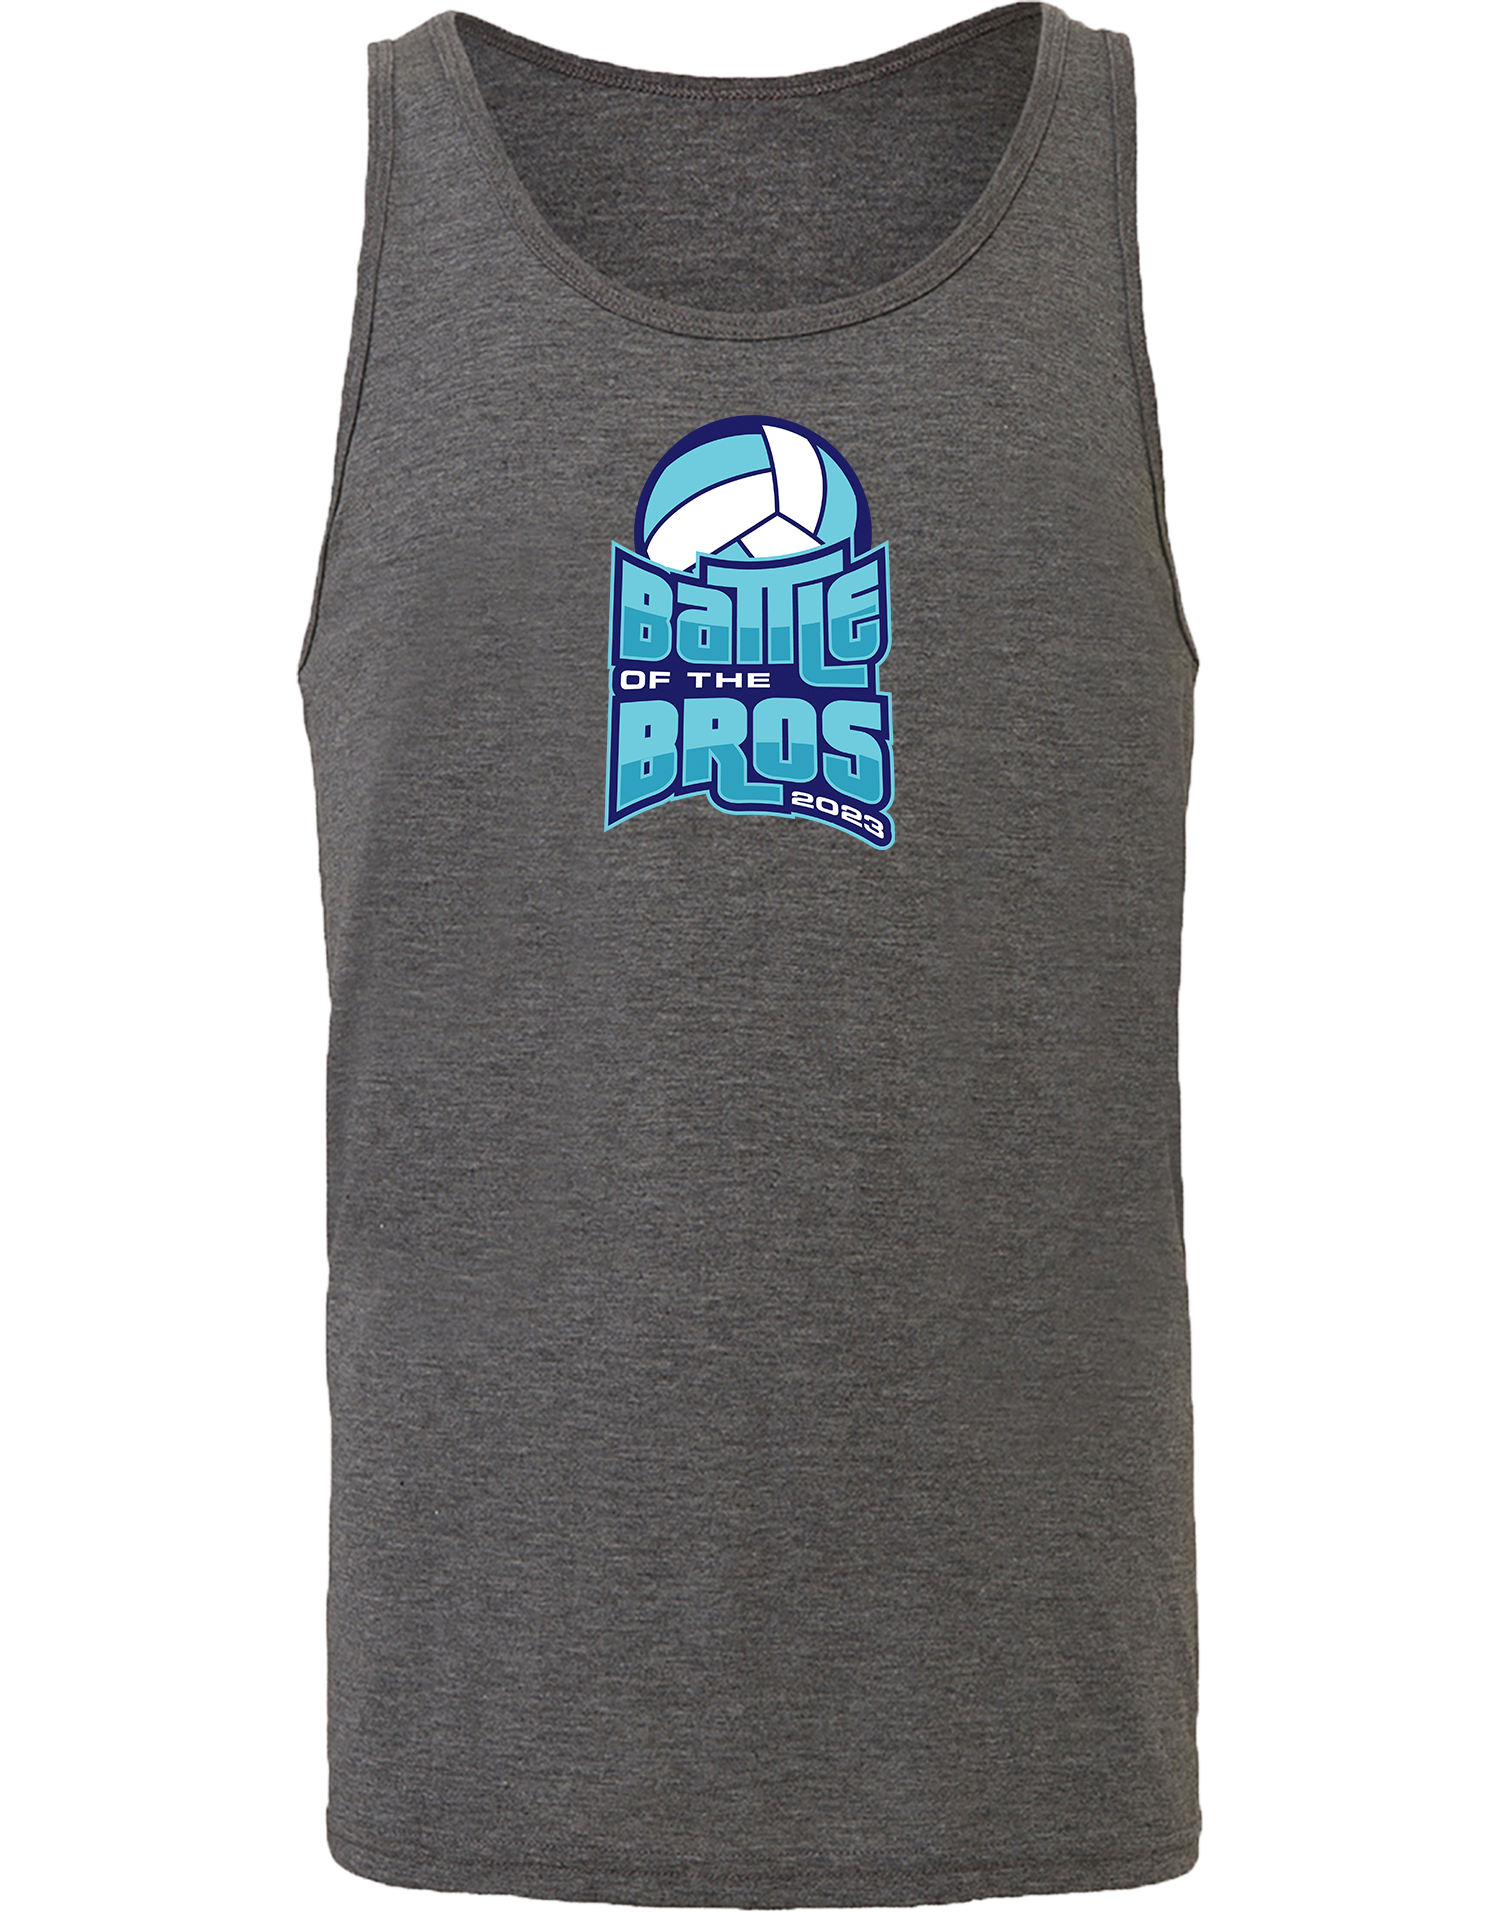 TANK TOP - 2023 Battle of the Bros